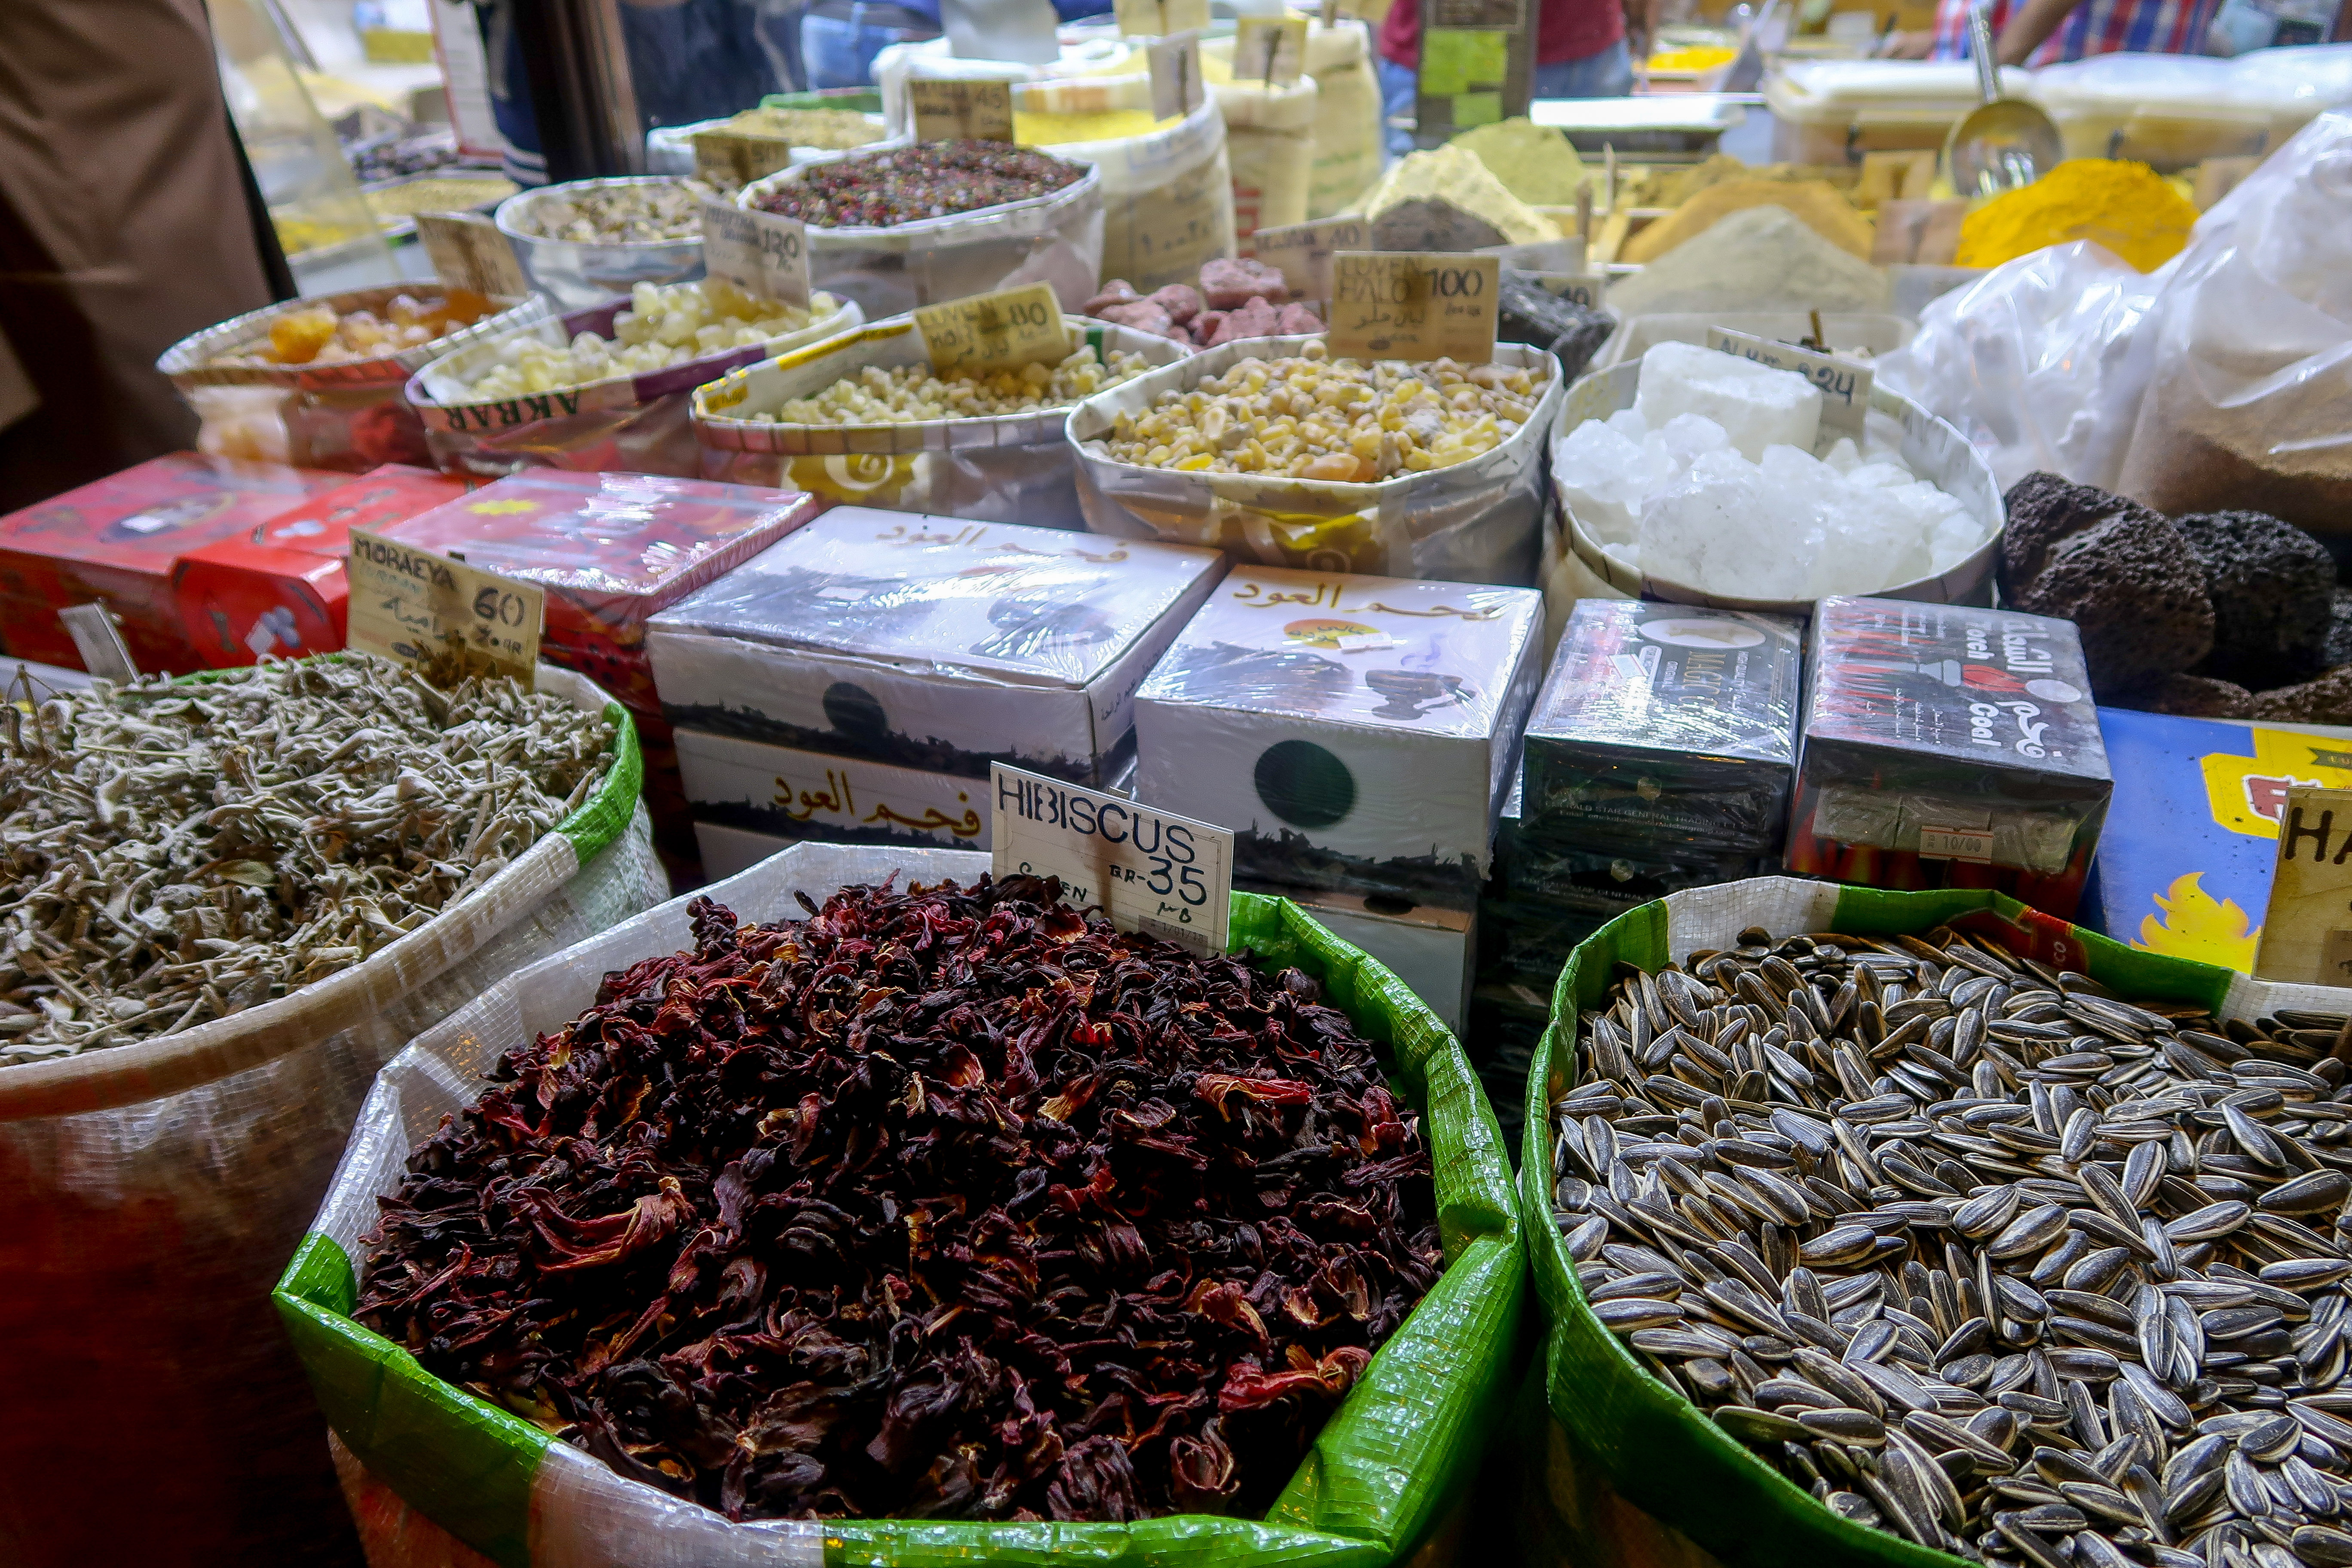 Souq Waquif, spices for cooking | Visit Qatar | Doha, the capital of Qatar is located in the Middle East and the World Cup 2022 location. Find out how I spent 4 days on my visit to Qatar | Travel Guide & Tips | Elle Blonde Luxury Lifestyle Destination Blog